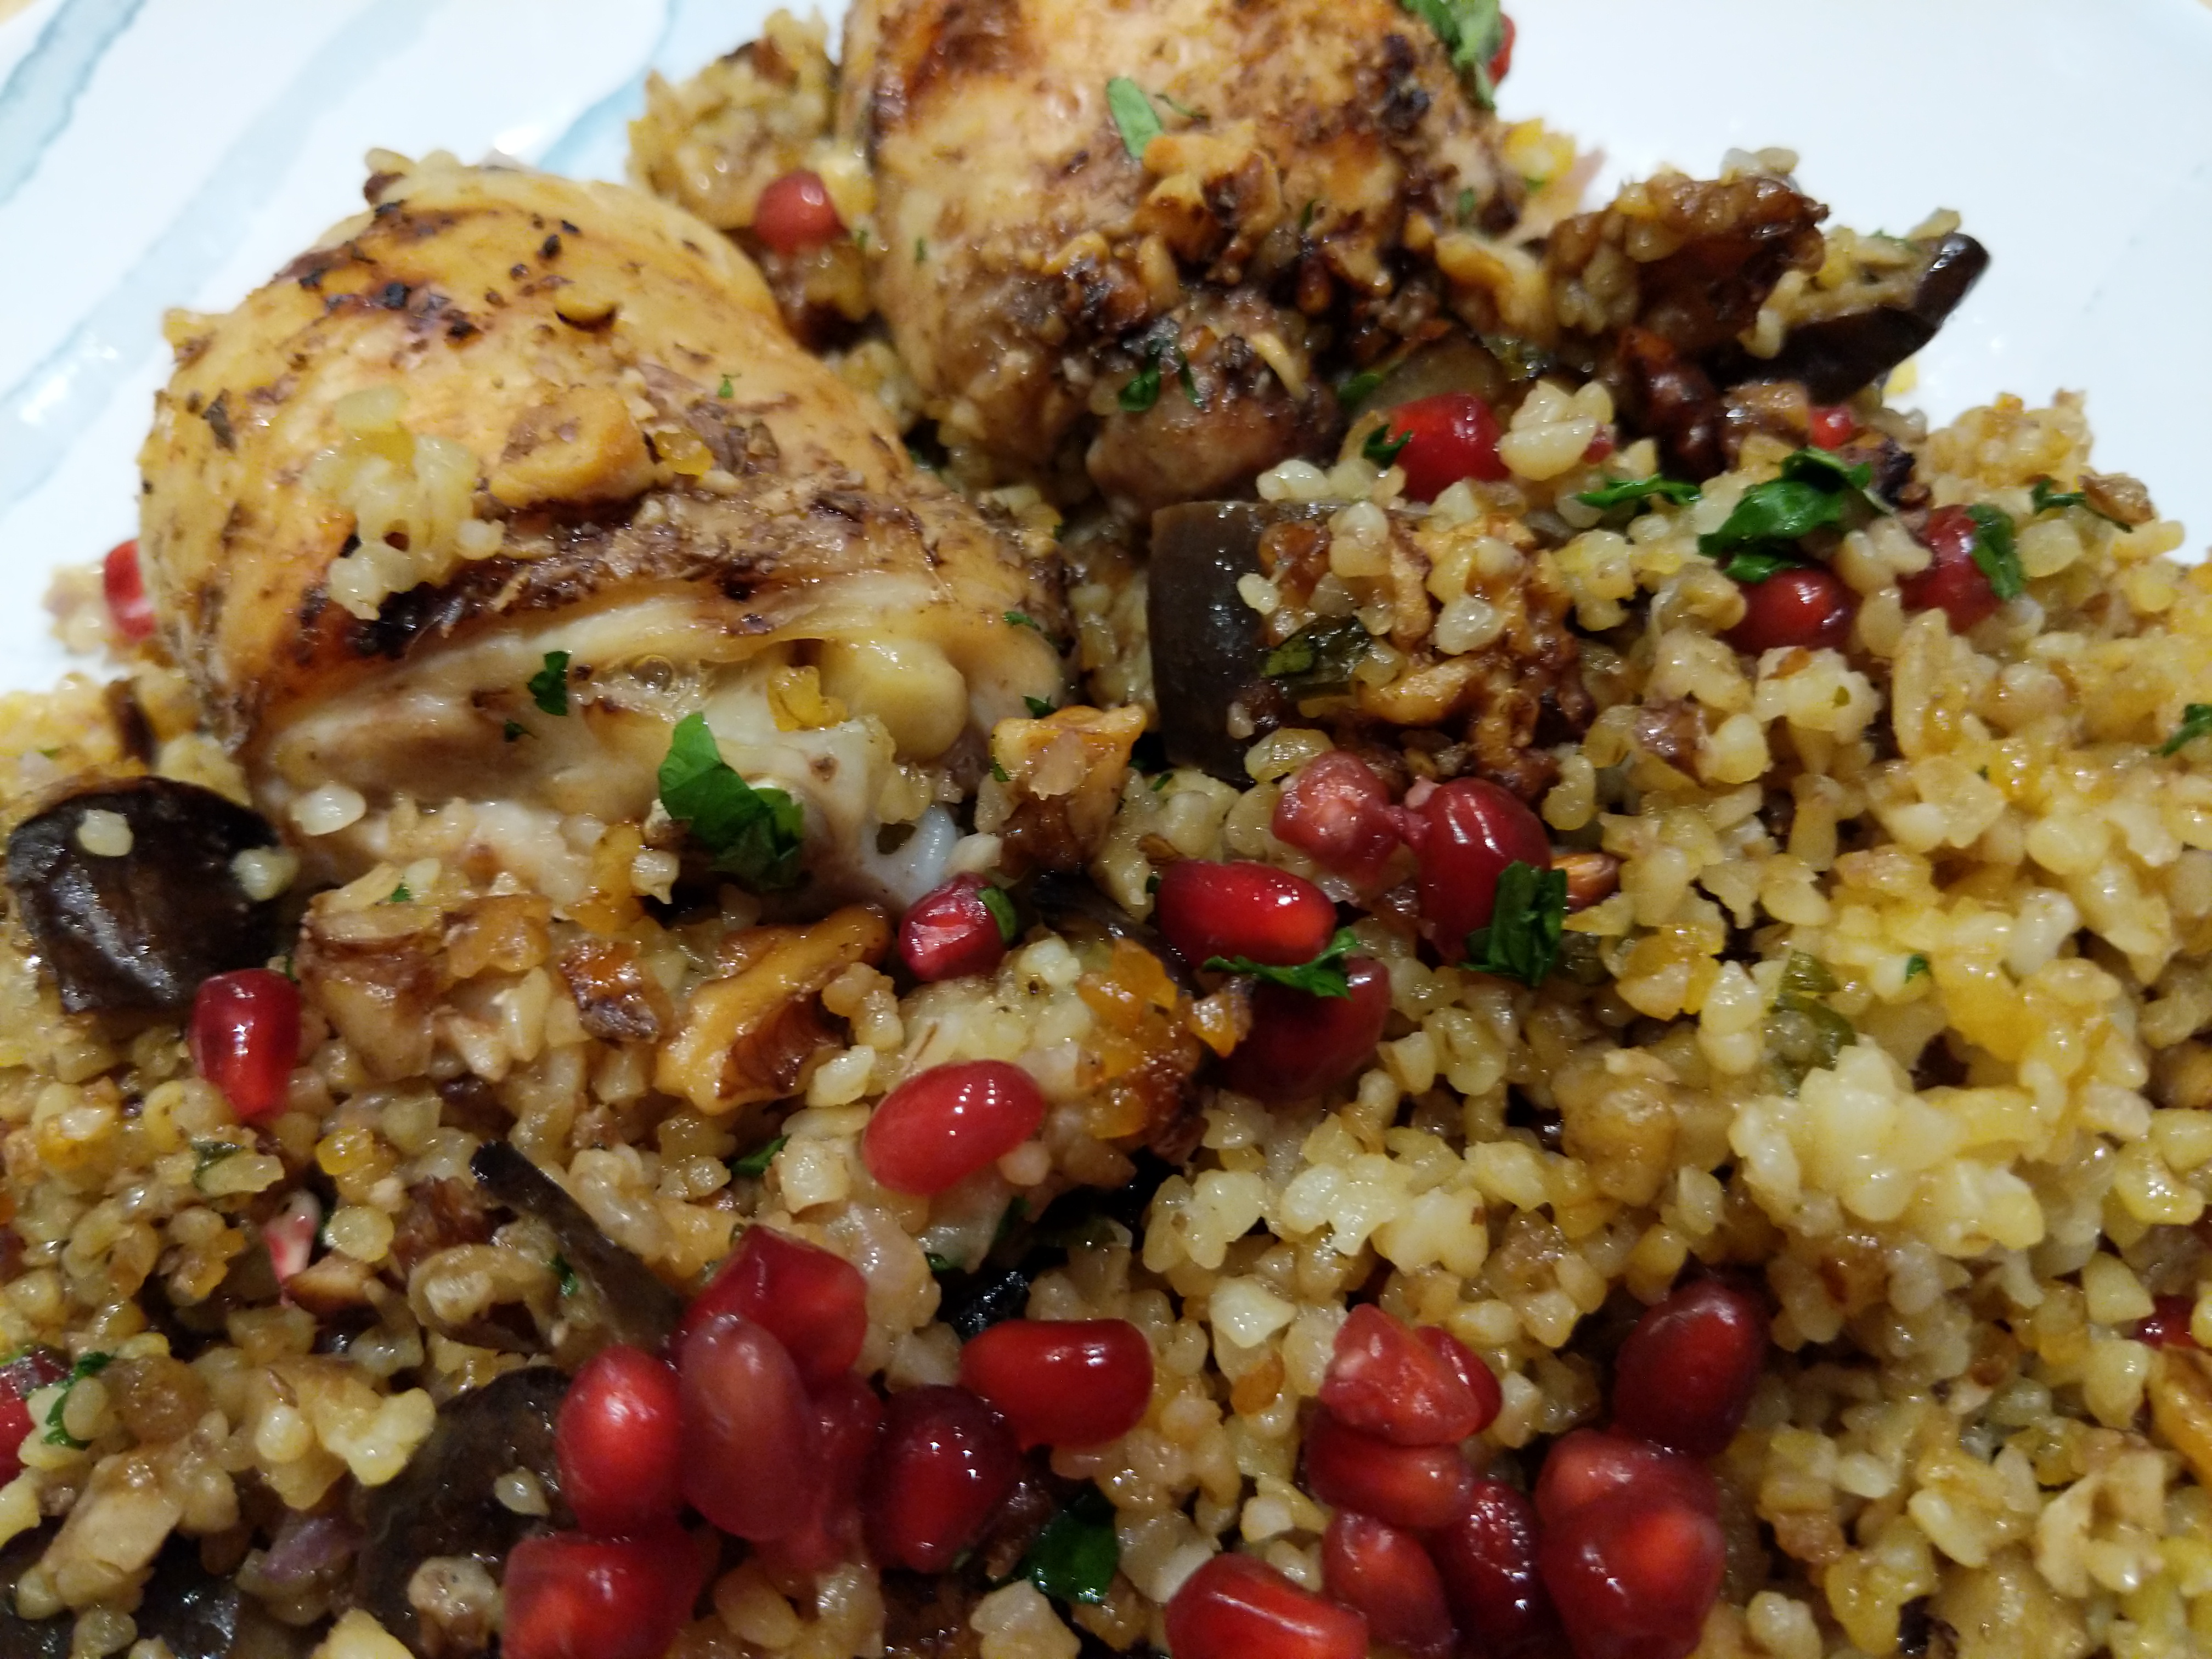 Chicken with pomegranate and walnuts